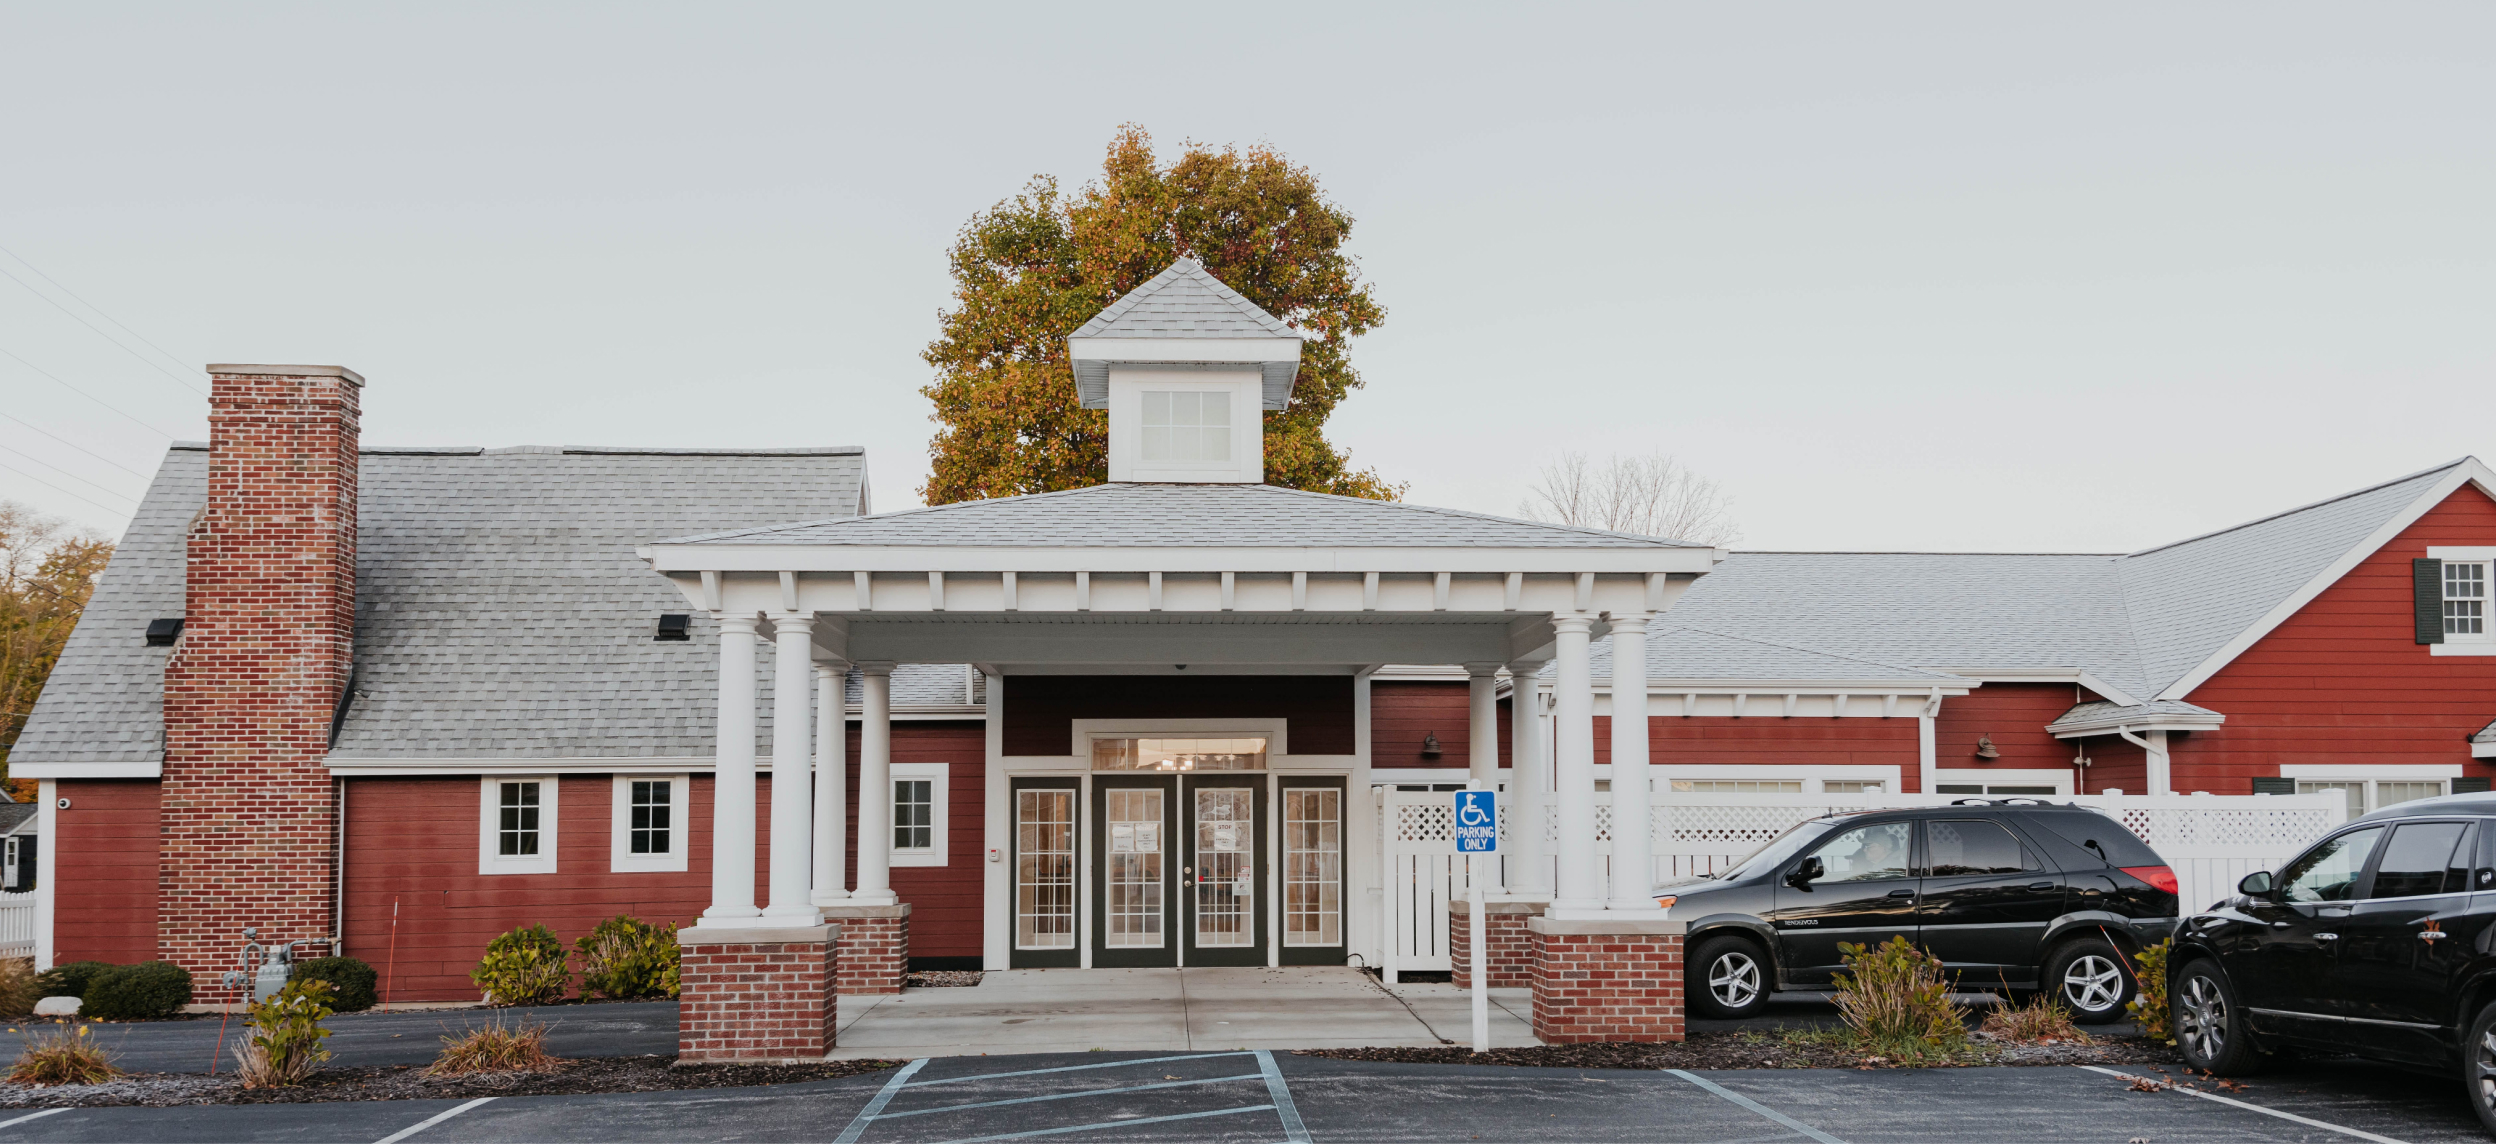 Front entrance and facade of The Little Red House facility showing the columns and a cupola and a car parked in the parking lot.